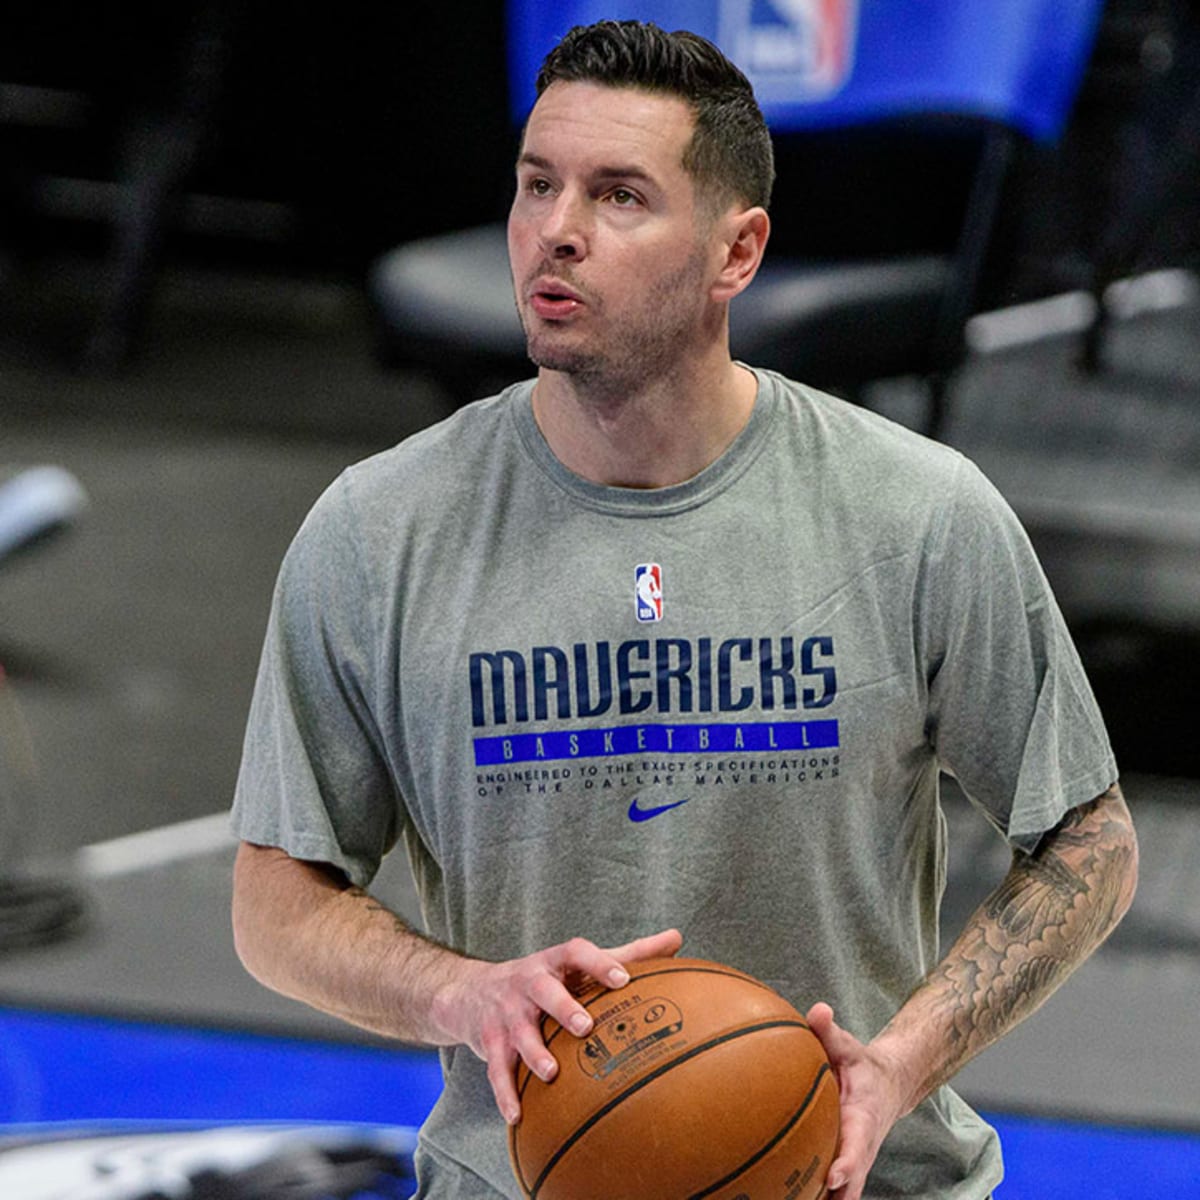 It's Time For Me To Reflect, Pause': Former Sixer JJ Redick Announces  Retirement From NBA - CBS Philadelphia